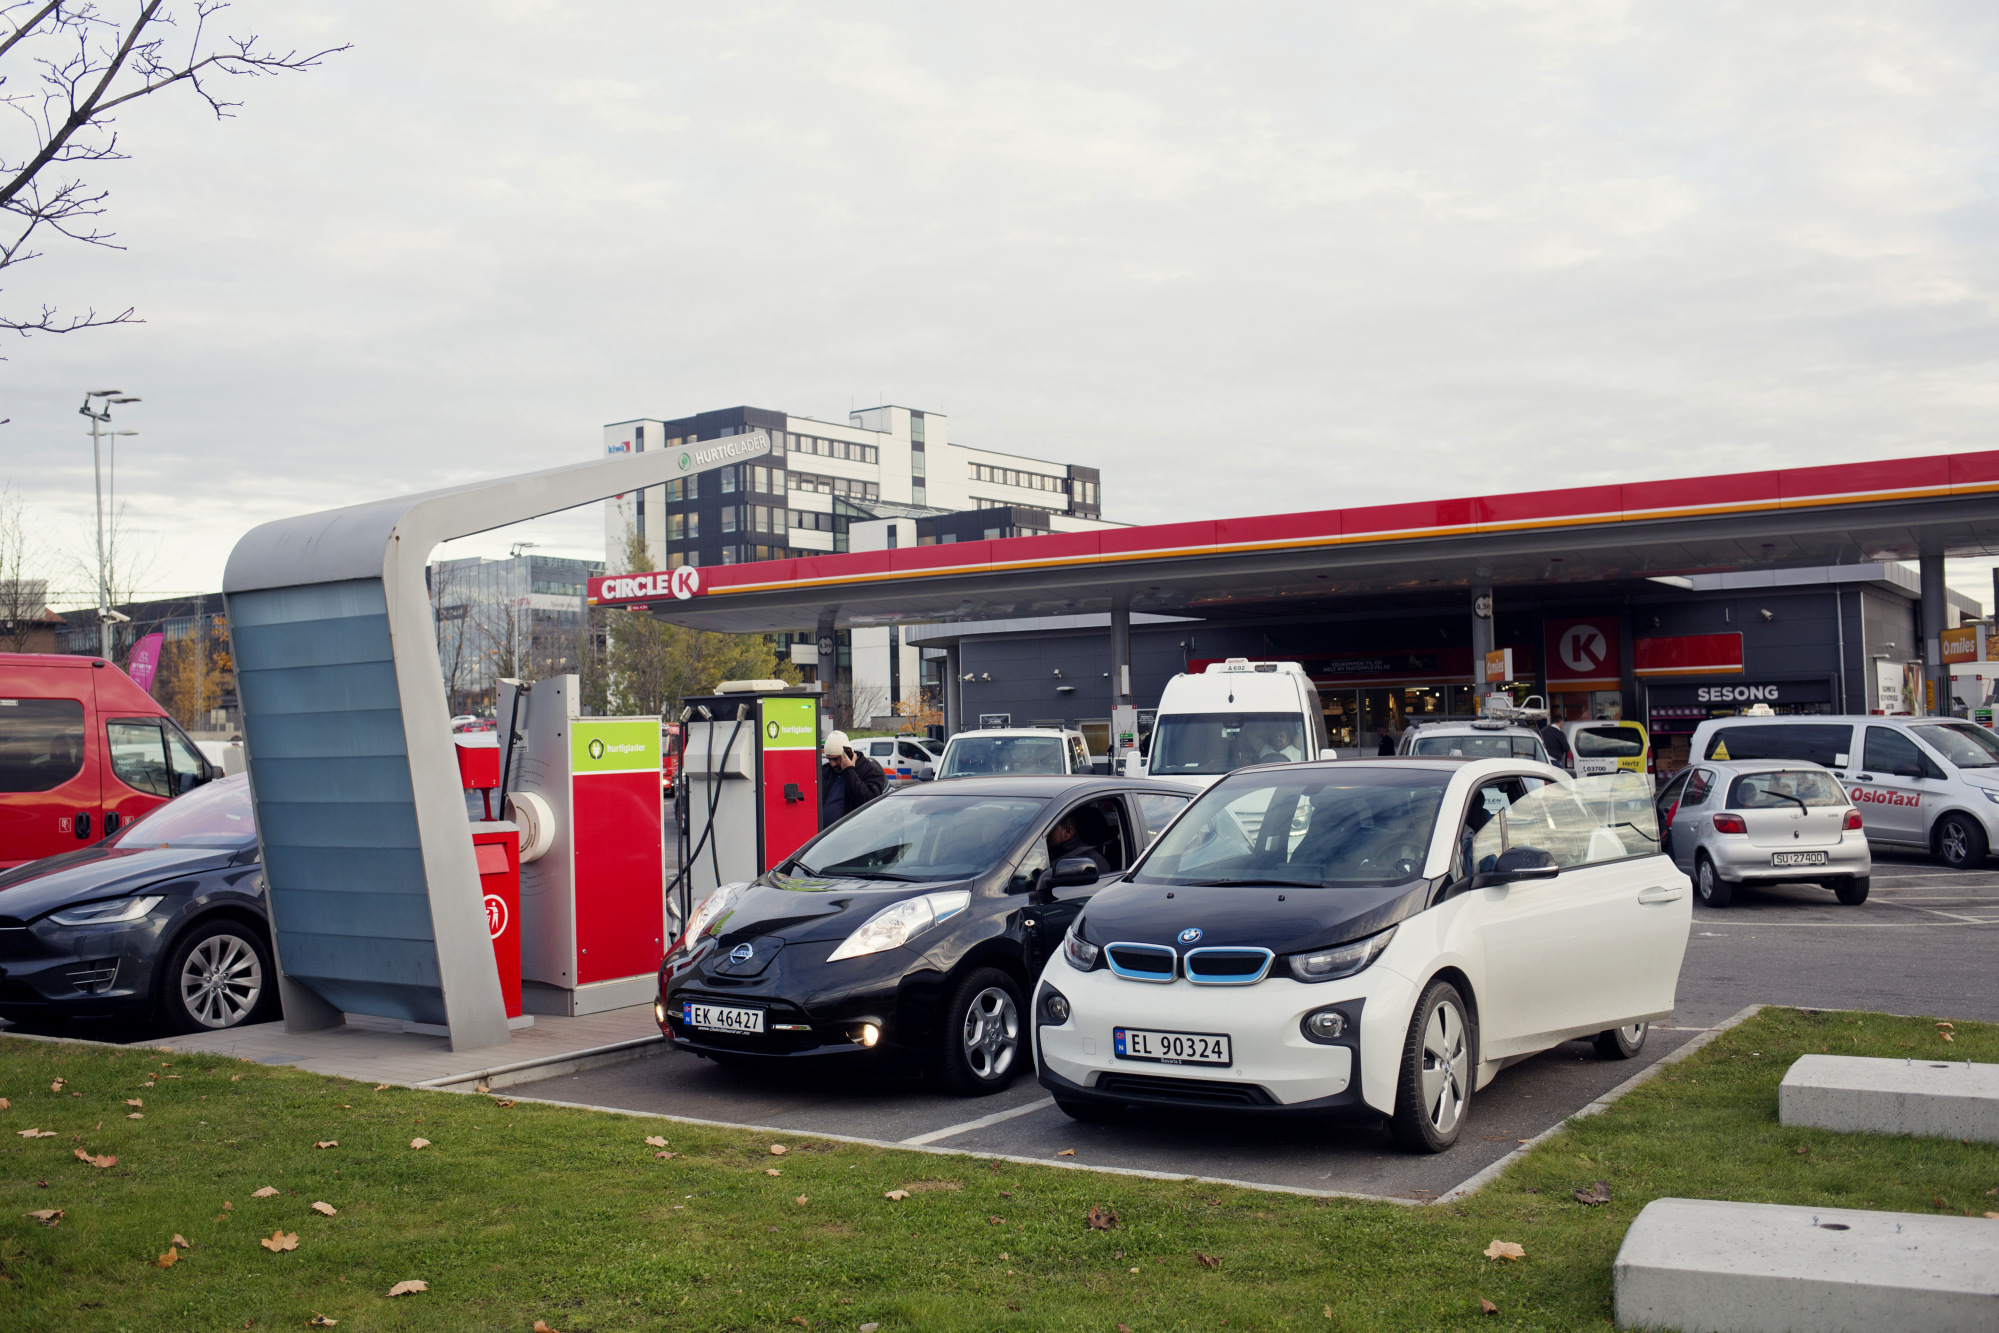 An electric vehicle charging station near a gas station in Oslo, Norway.